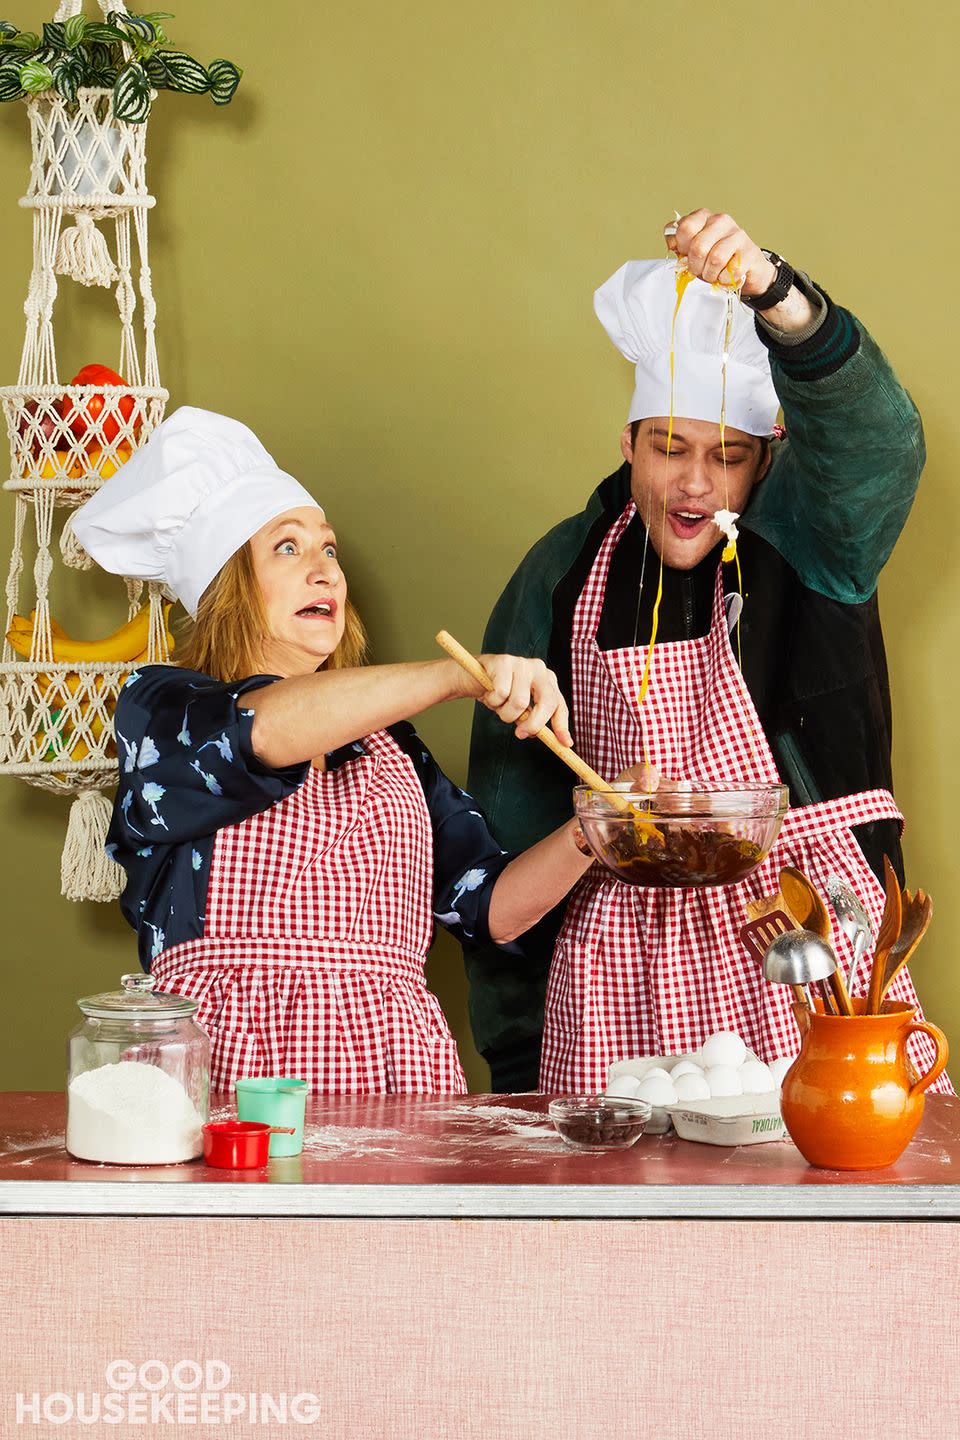 pete davidson and edie falco cooking in chefs hats and aprons